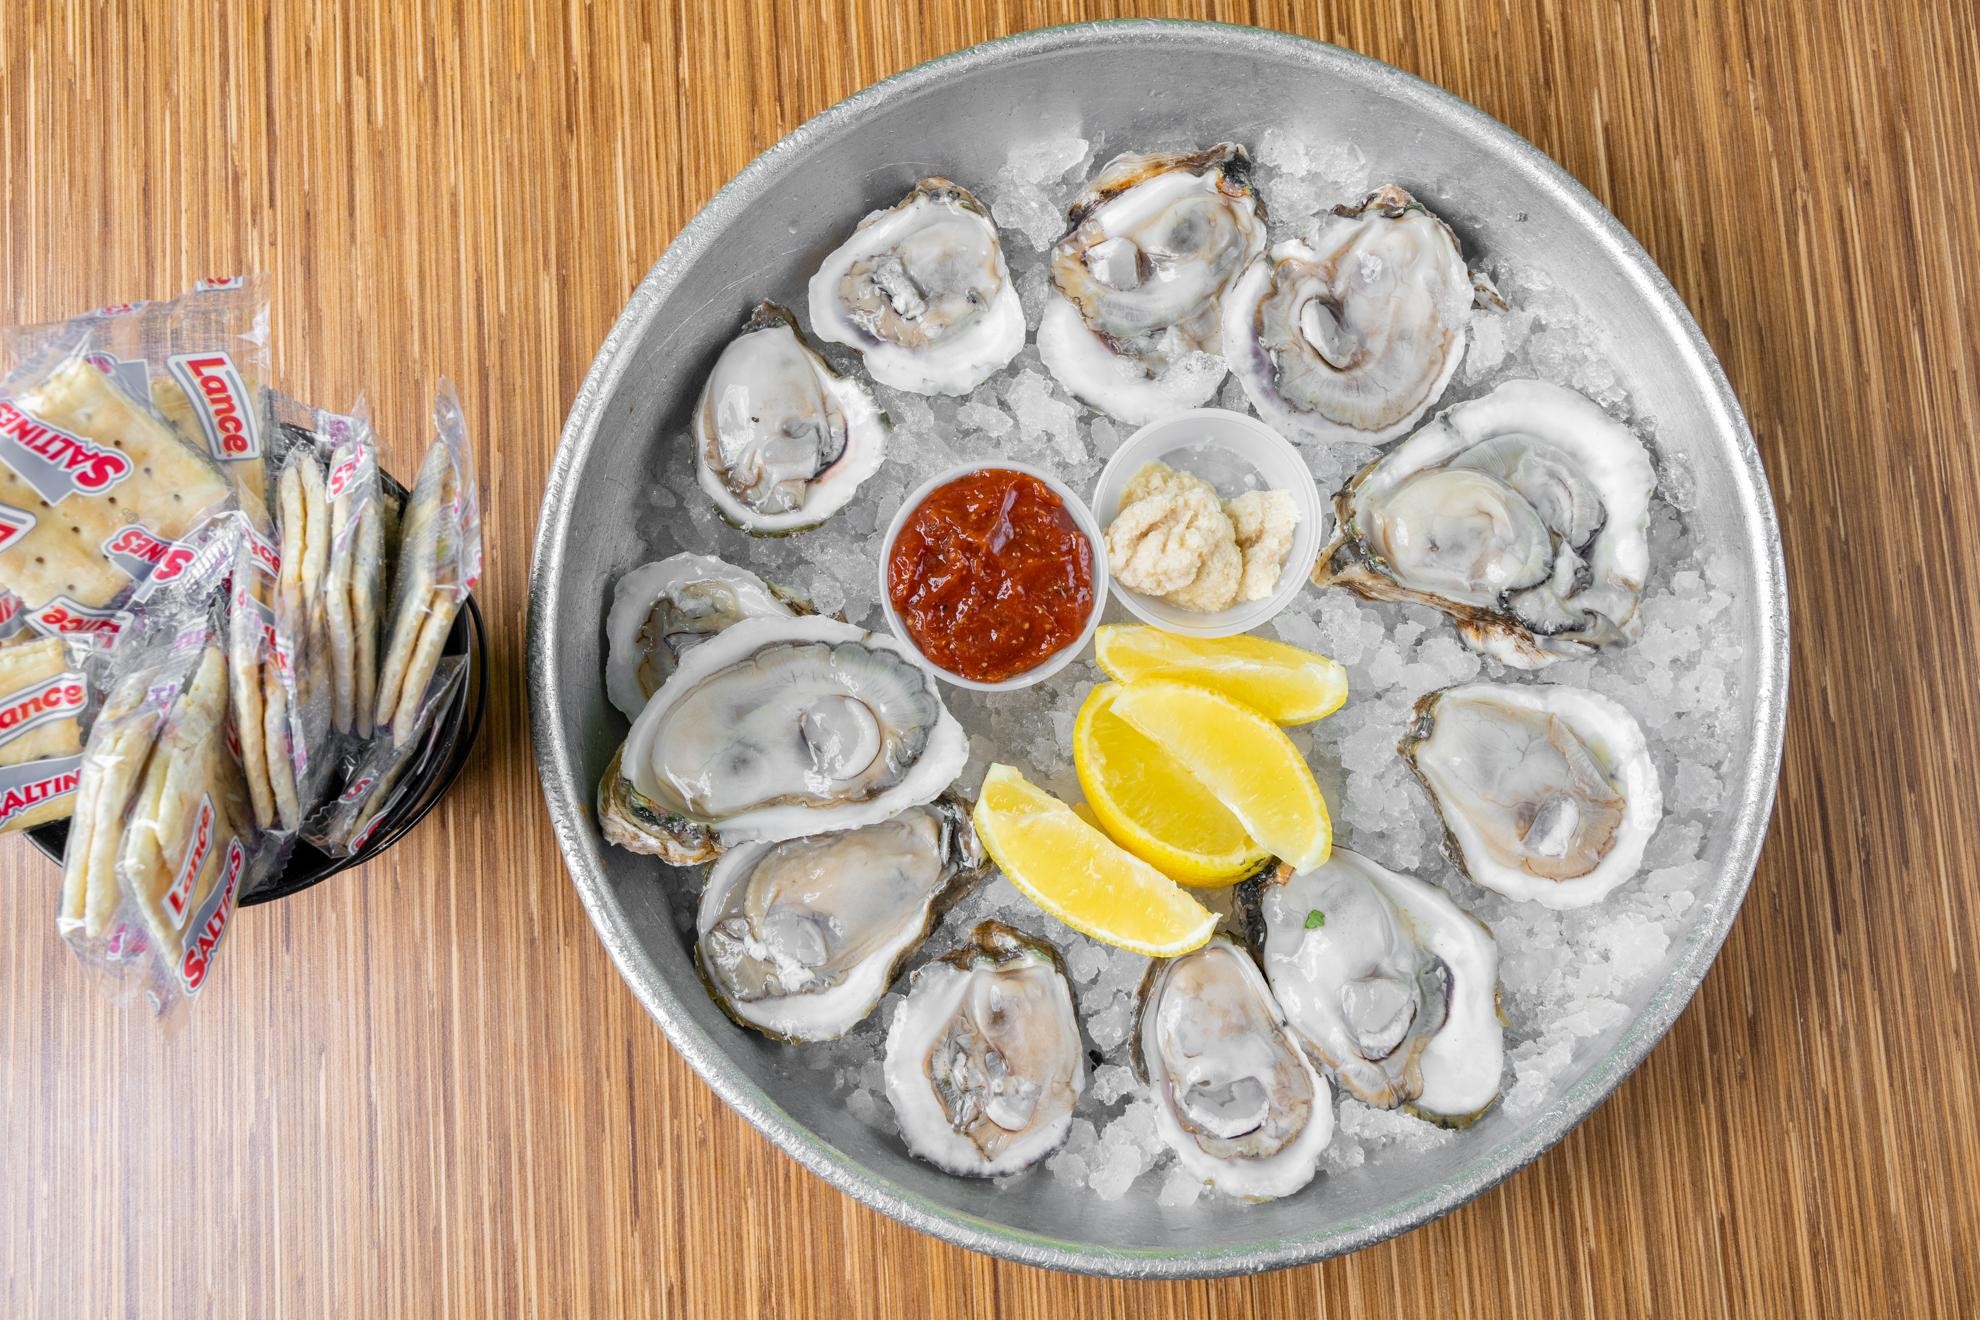 12 Raw Oysters To-Go